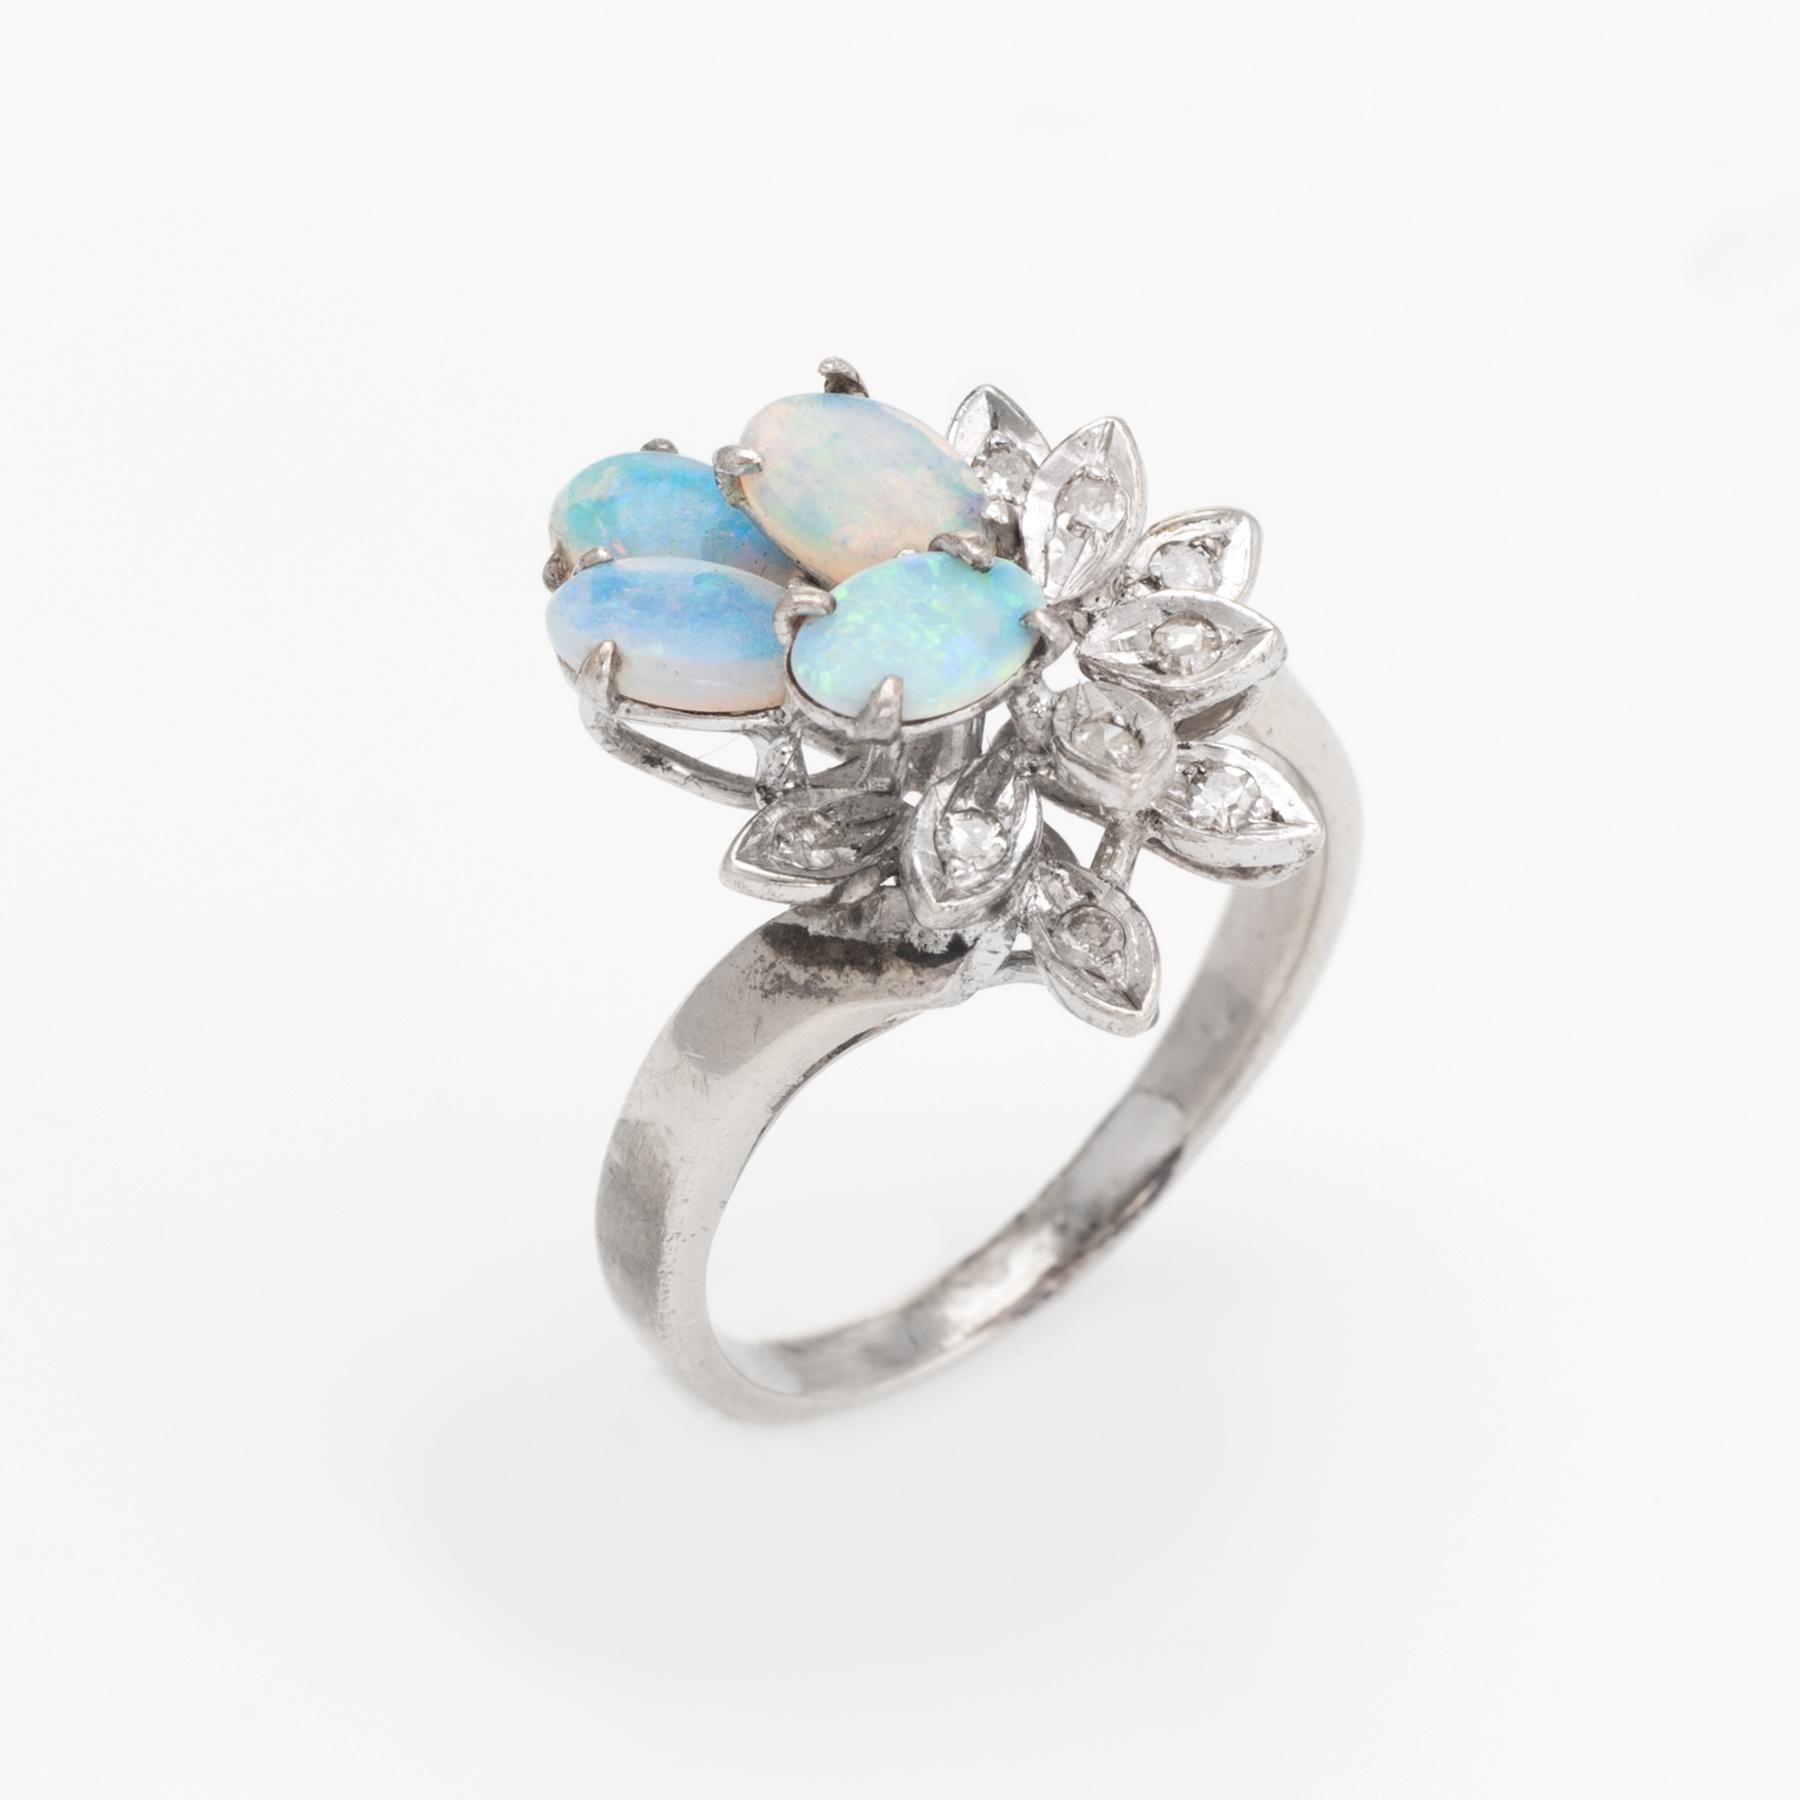 Finely detailed vintage opal & diamond cocktail ring (circa 1950s to 1960s), crafted in 10 karat white gold. 

Natural opals measure 6mm x 4mm each, estimated at 0.40 carats each (1.60 carats total estimated weight), accented 10 estimated 0.01 carat